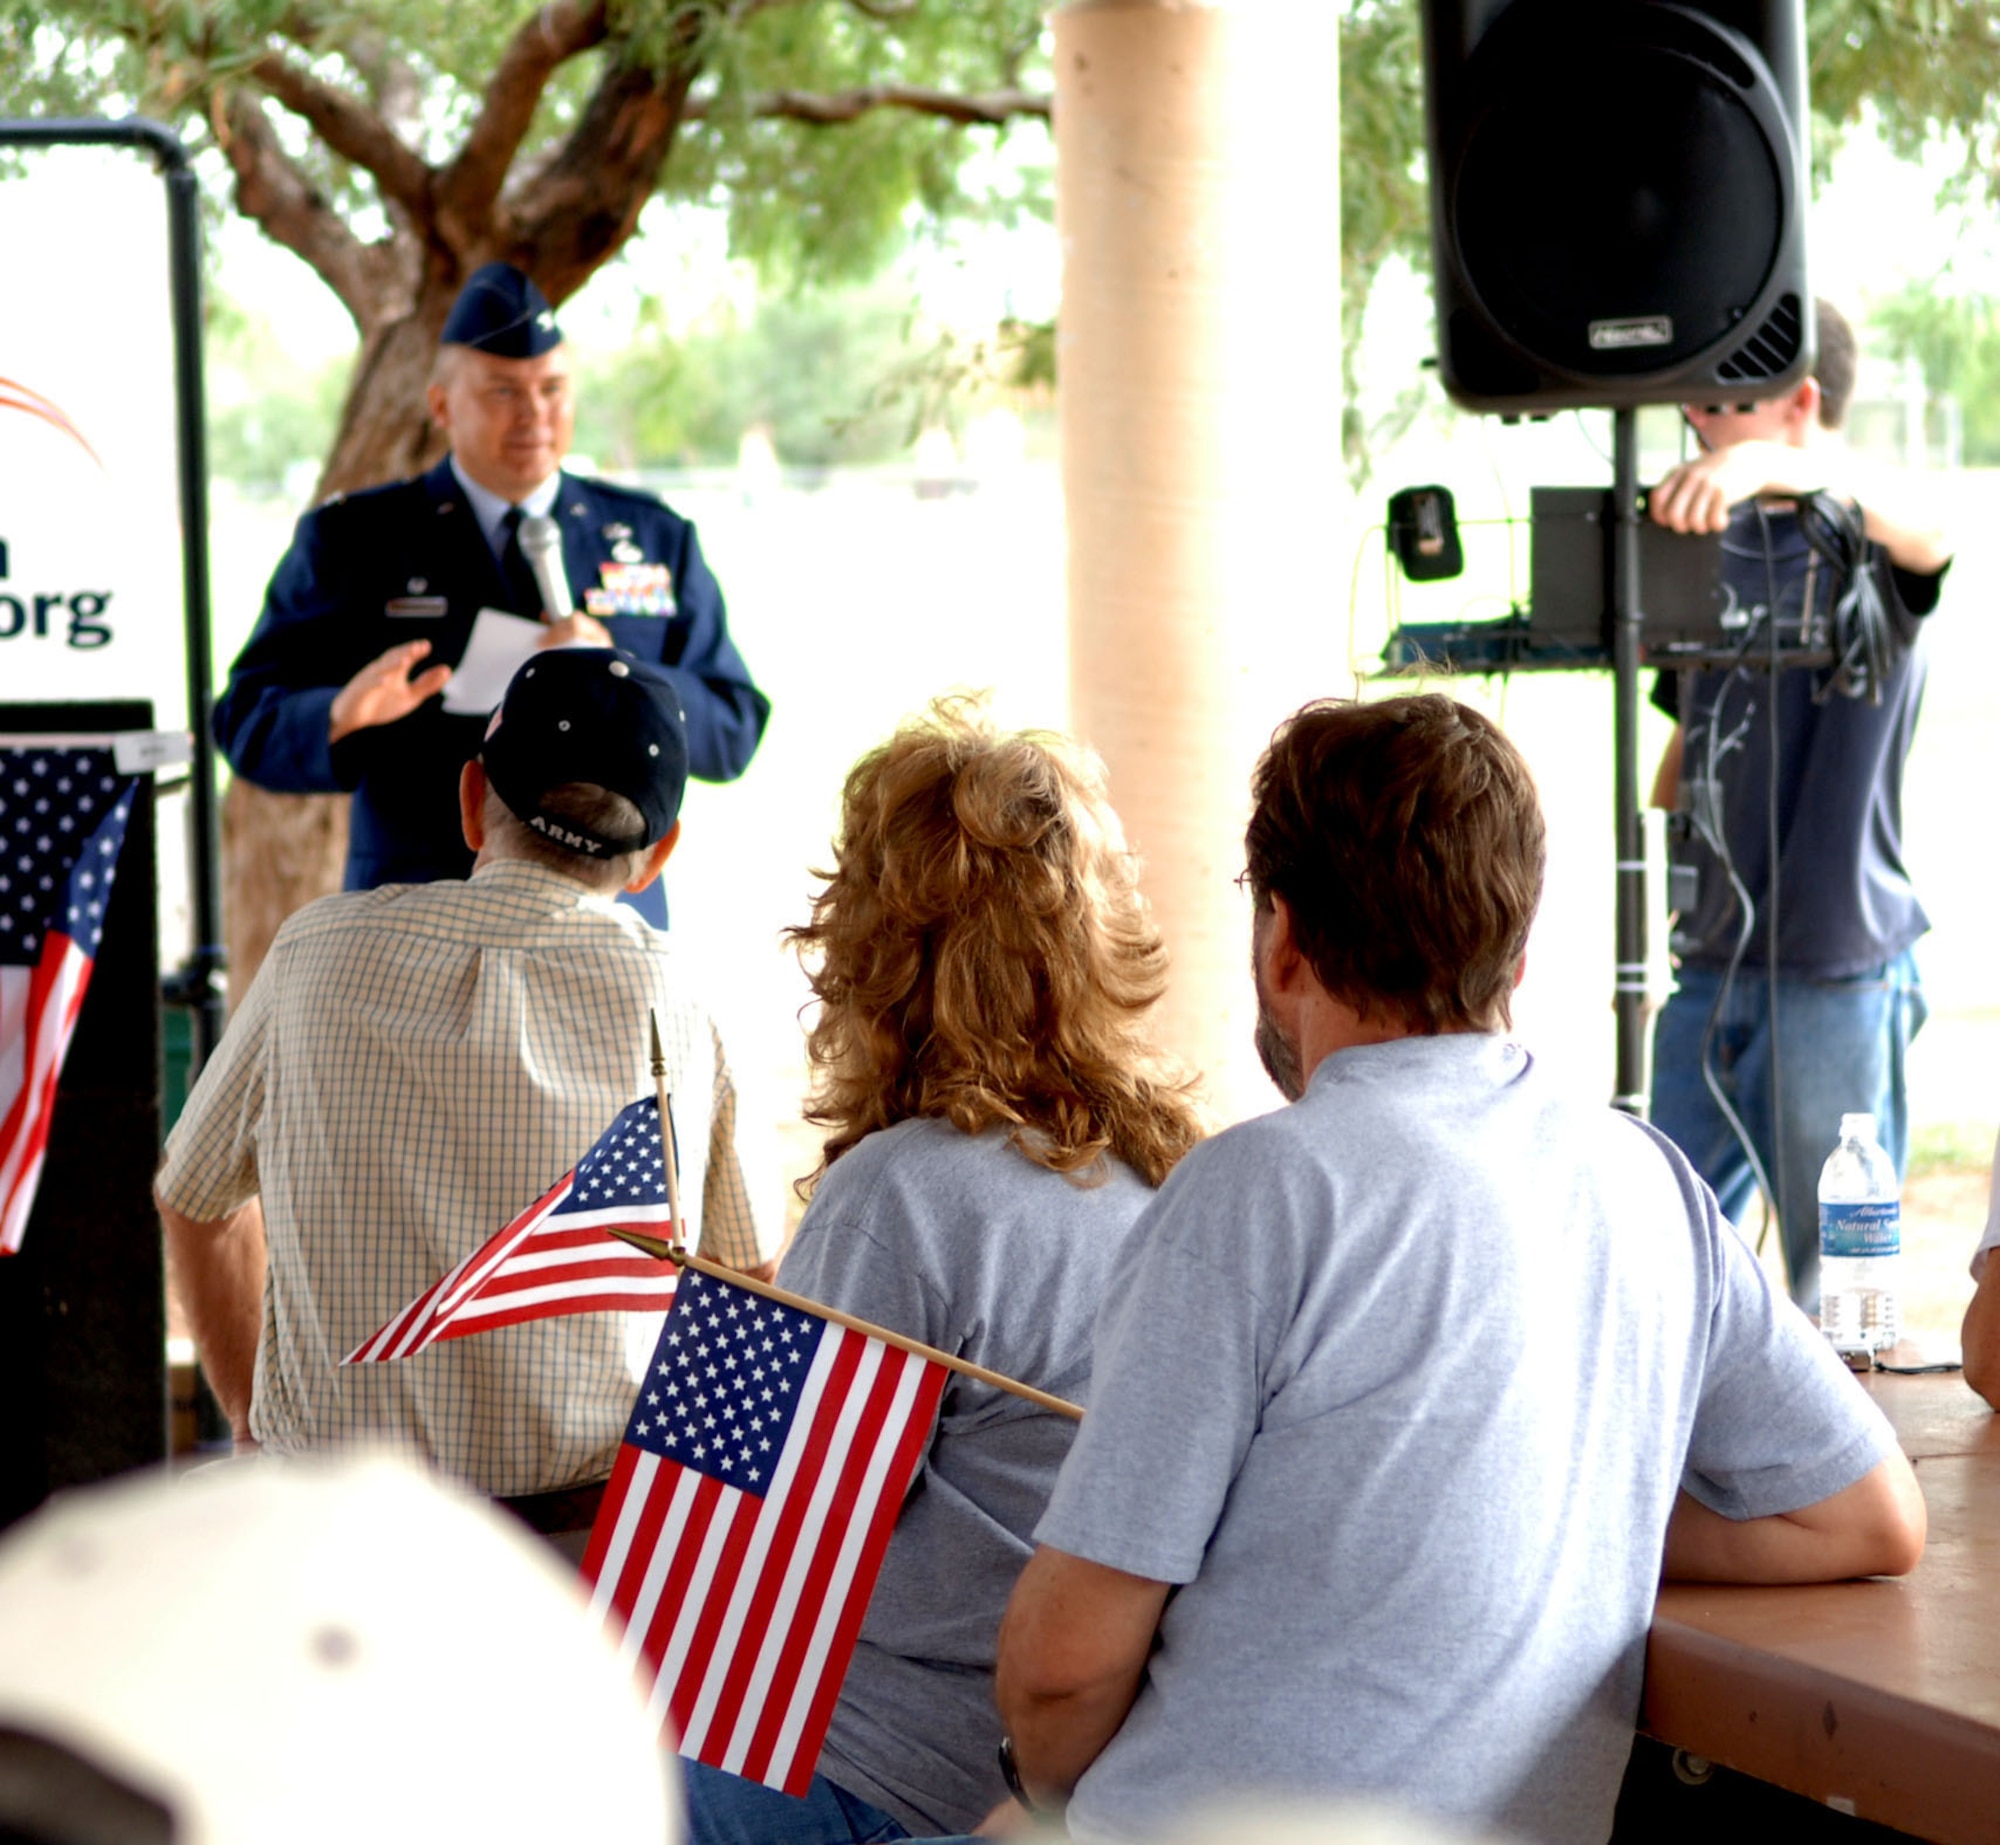 A crowd of more than 100 veterans and their families rallied together Sept. 7 at Freedom Park in Tucson, Arizona to show their support for American military members serving faithfully in the Global War on Terror. The event, sponsored by Move America Foward, is one of a number of events scheduled to take place during the group's 27 city tour accross the United States.  
